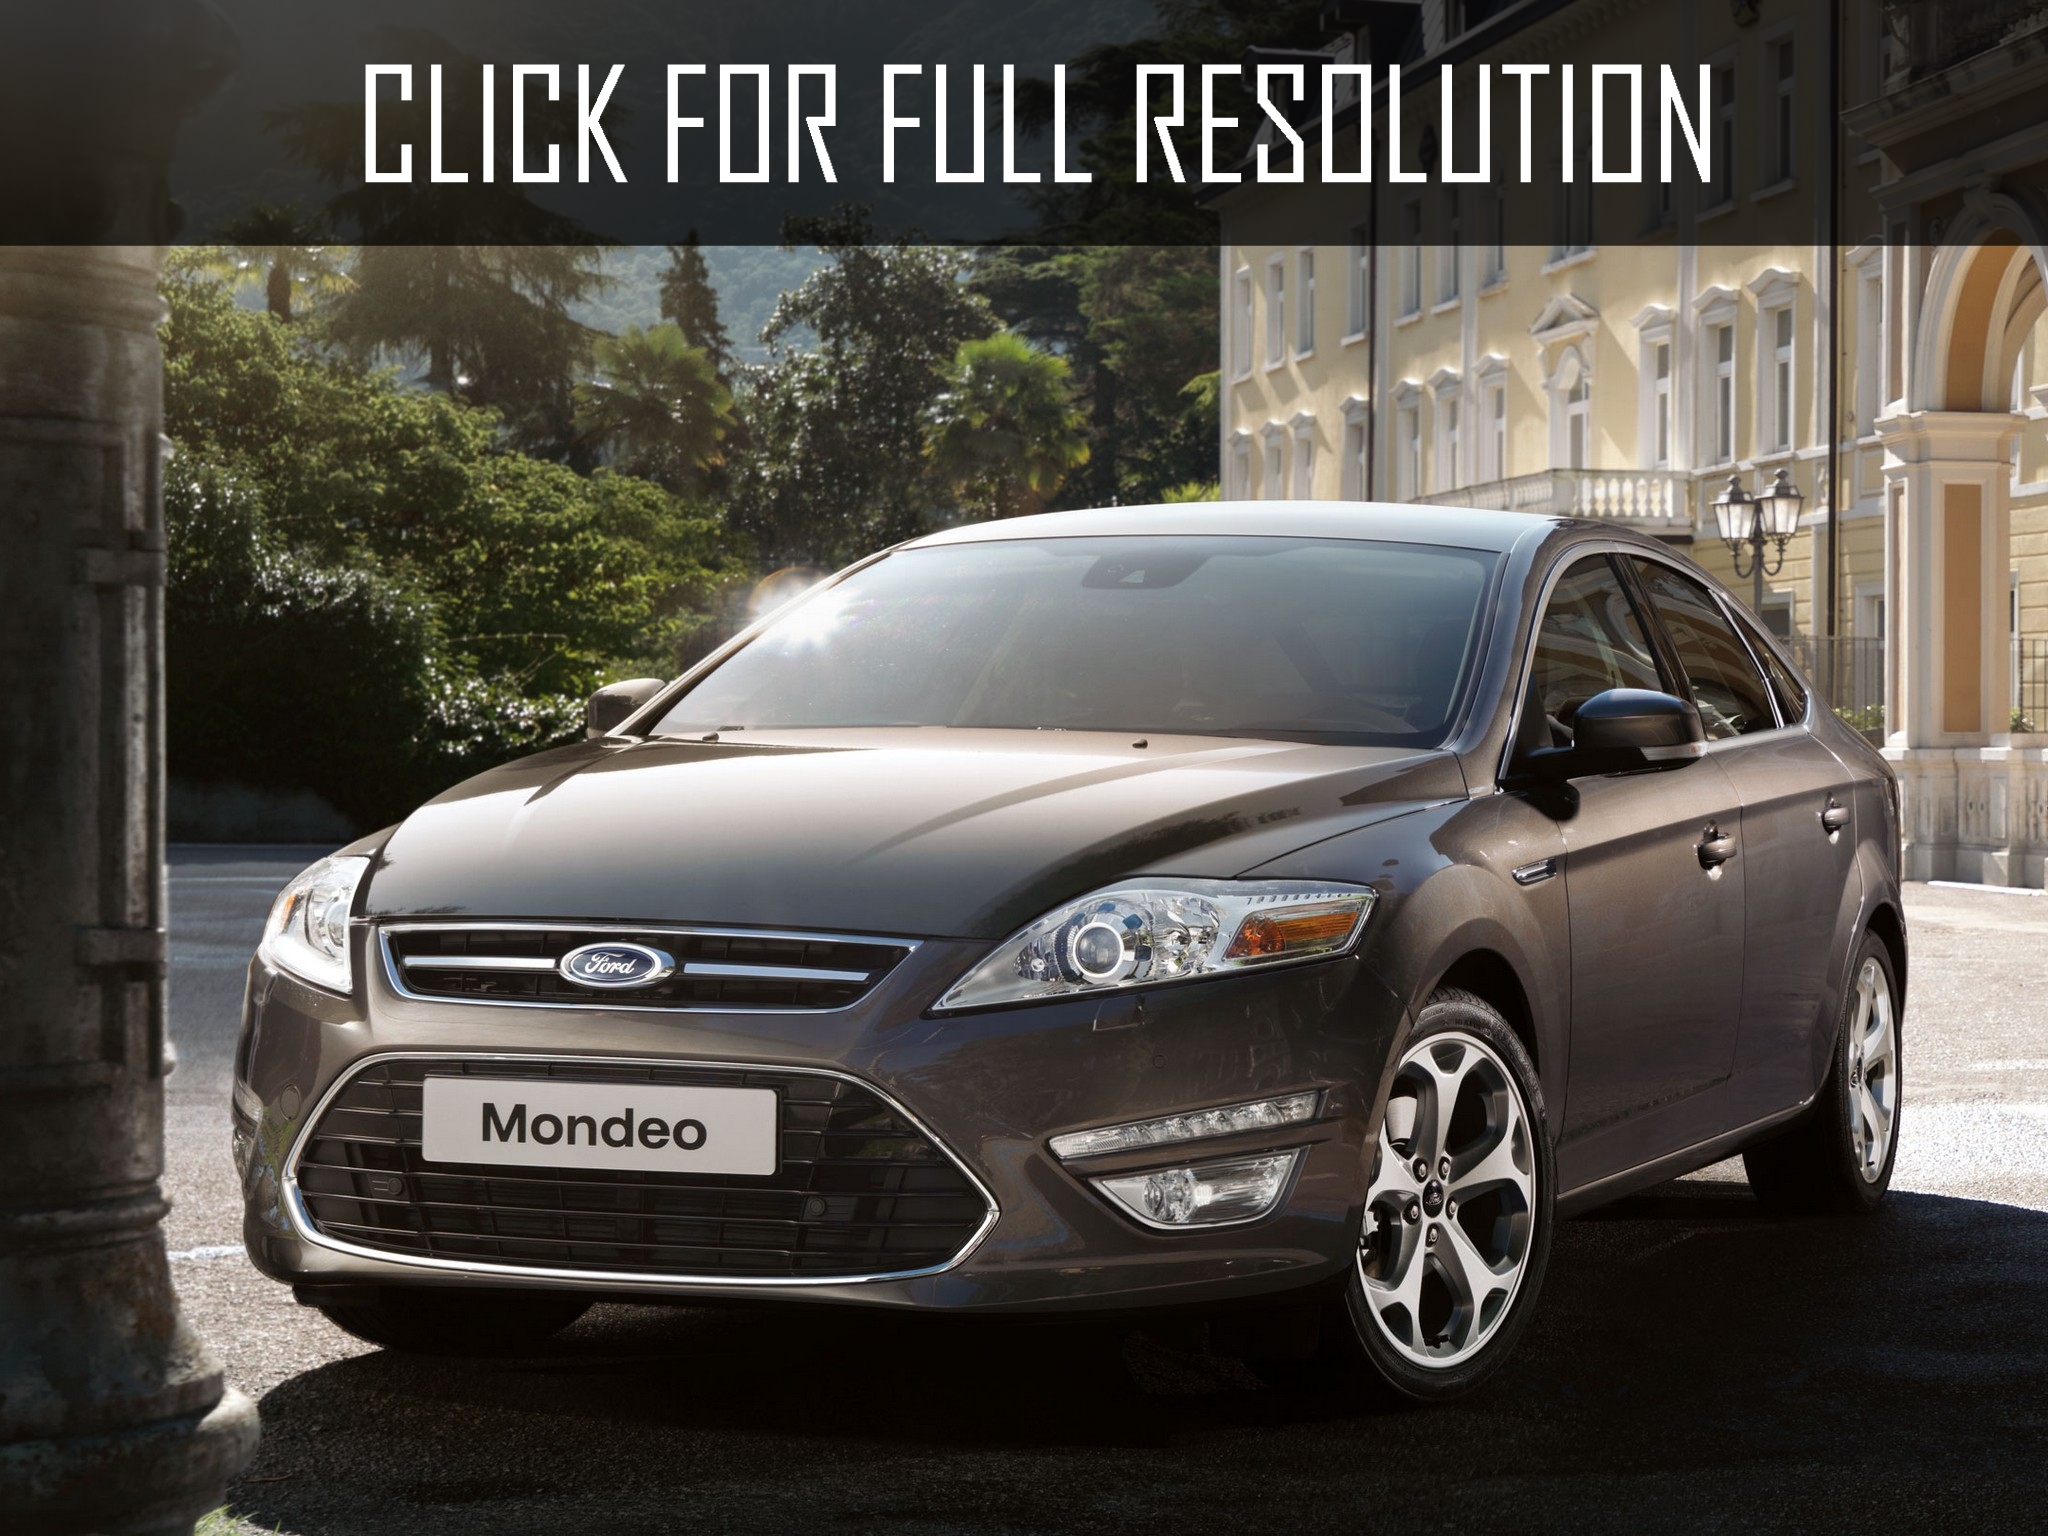 Ford Mondeo 1.6 Ti-Vct